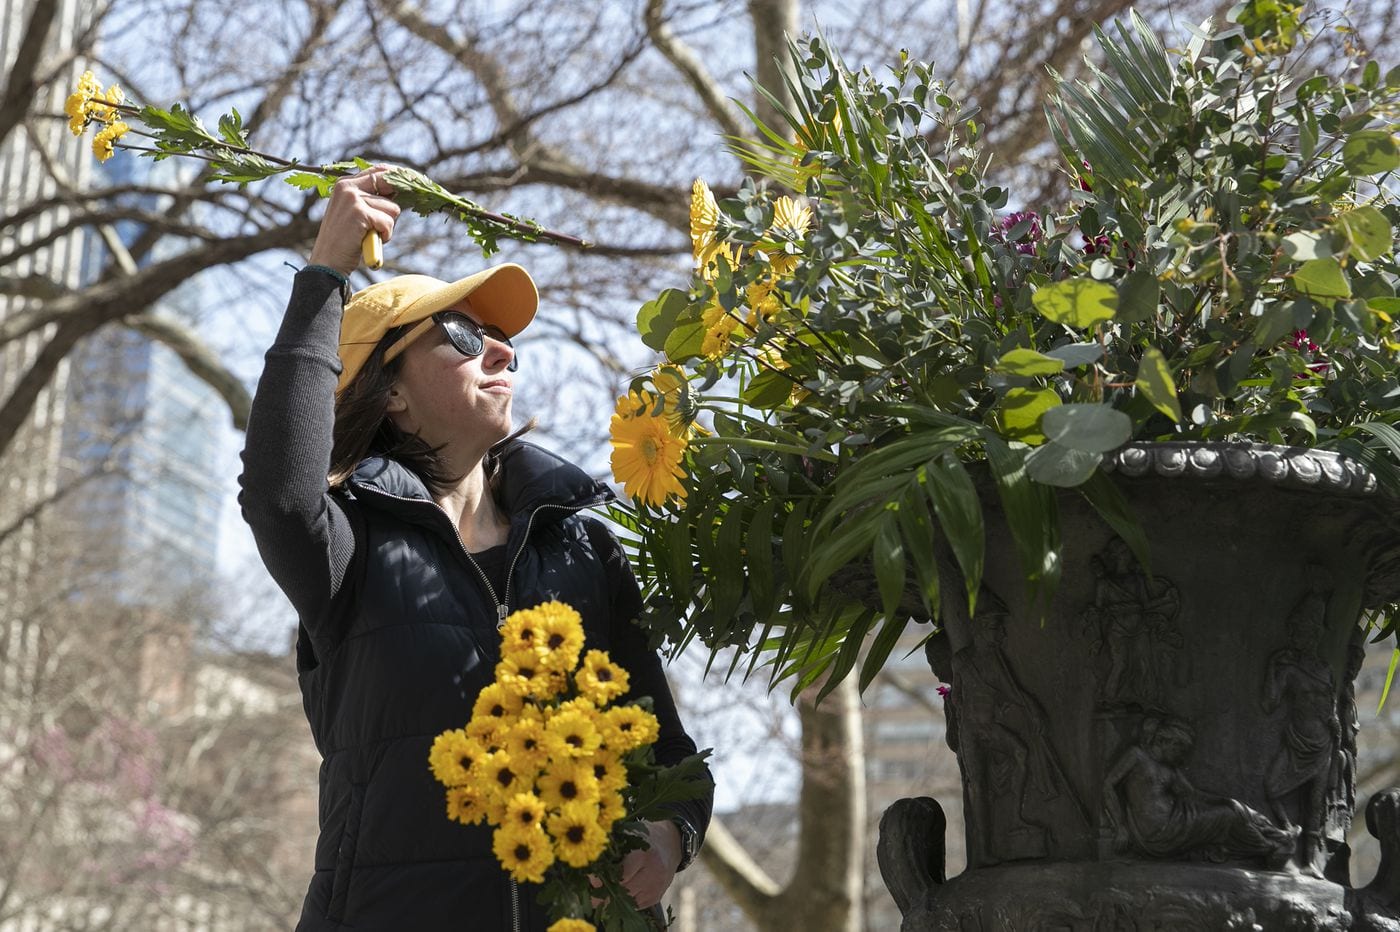 Philadelphia florists give away 2,000 flowers from events canceled due to coronavirus